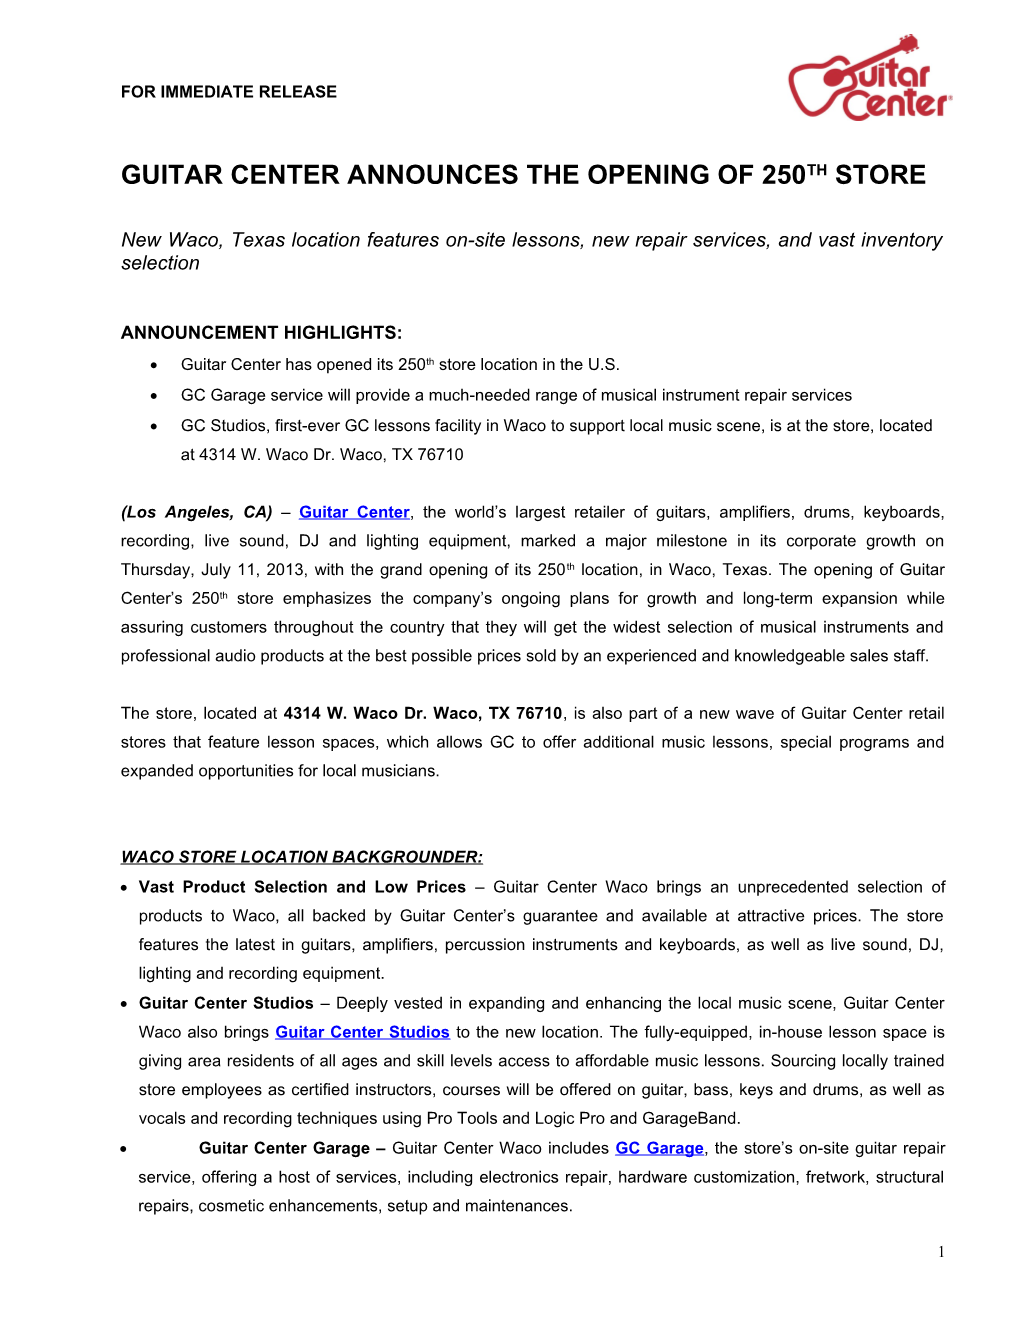 Guitar Center Announces the Opening of 250Th Store